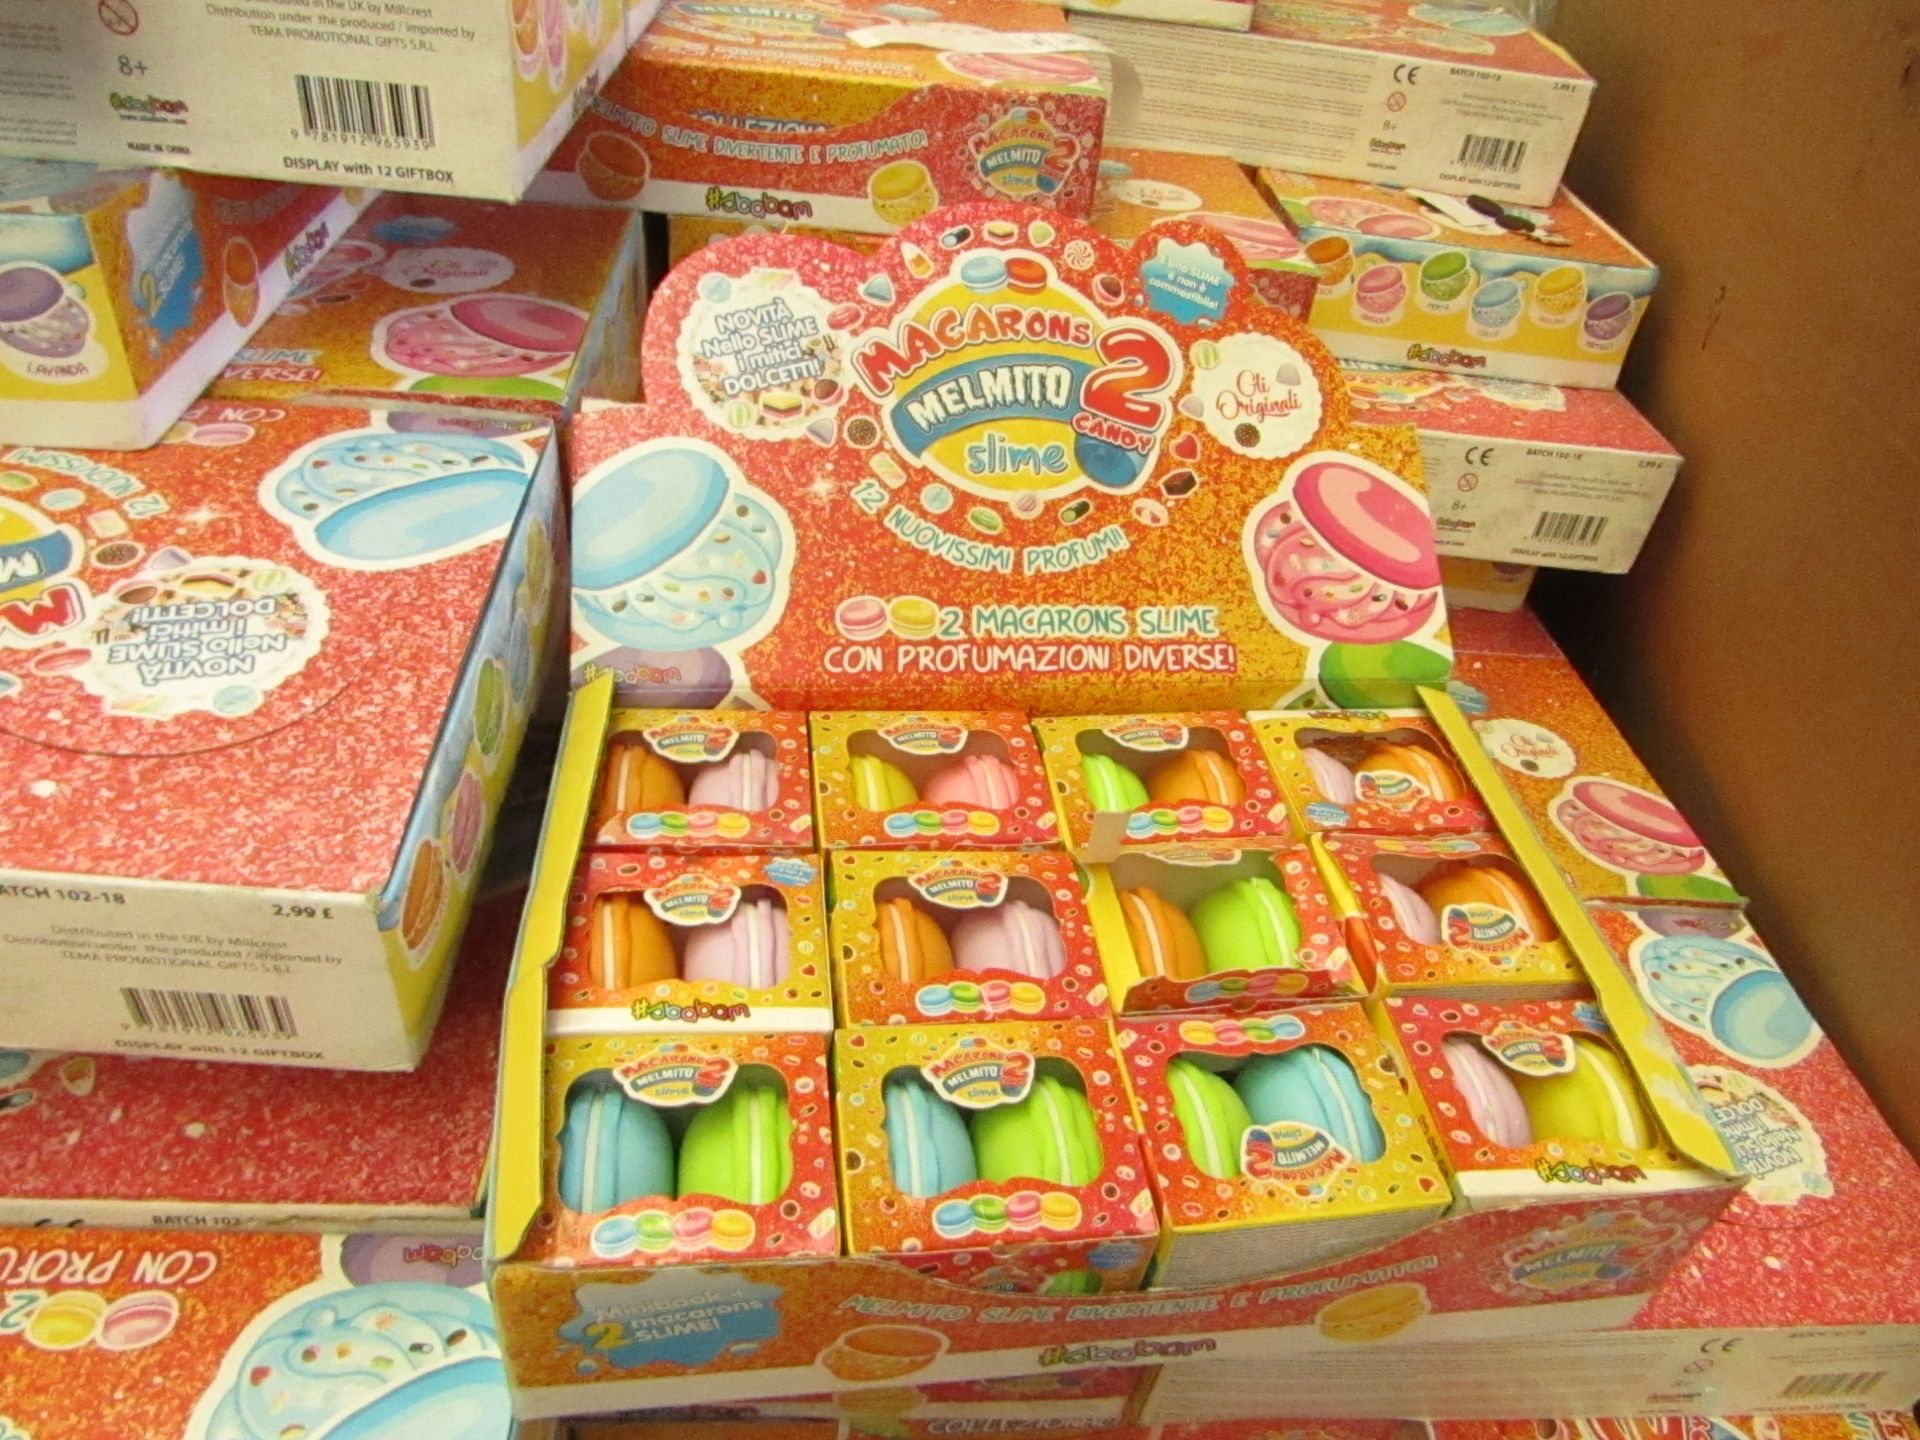 2 x Boxes of 12 Packs of 2 Macarons Slime - New & Boxed.